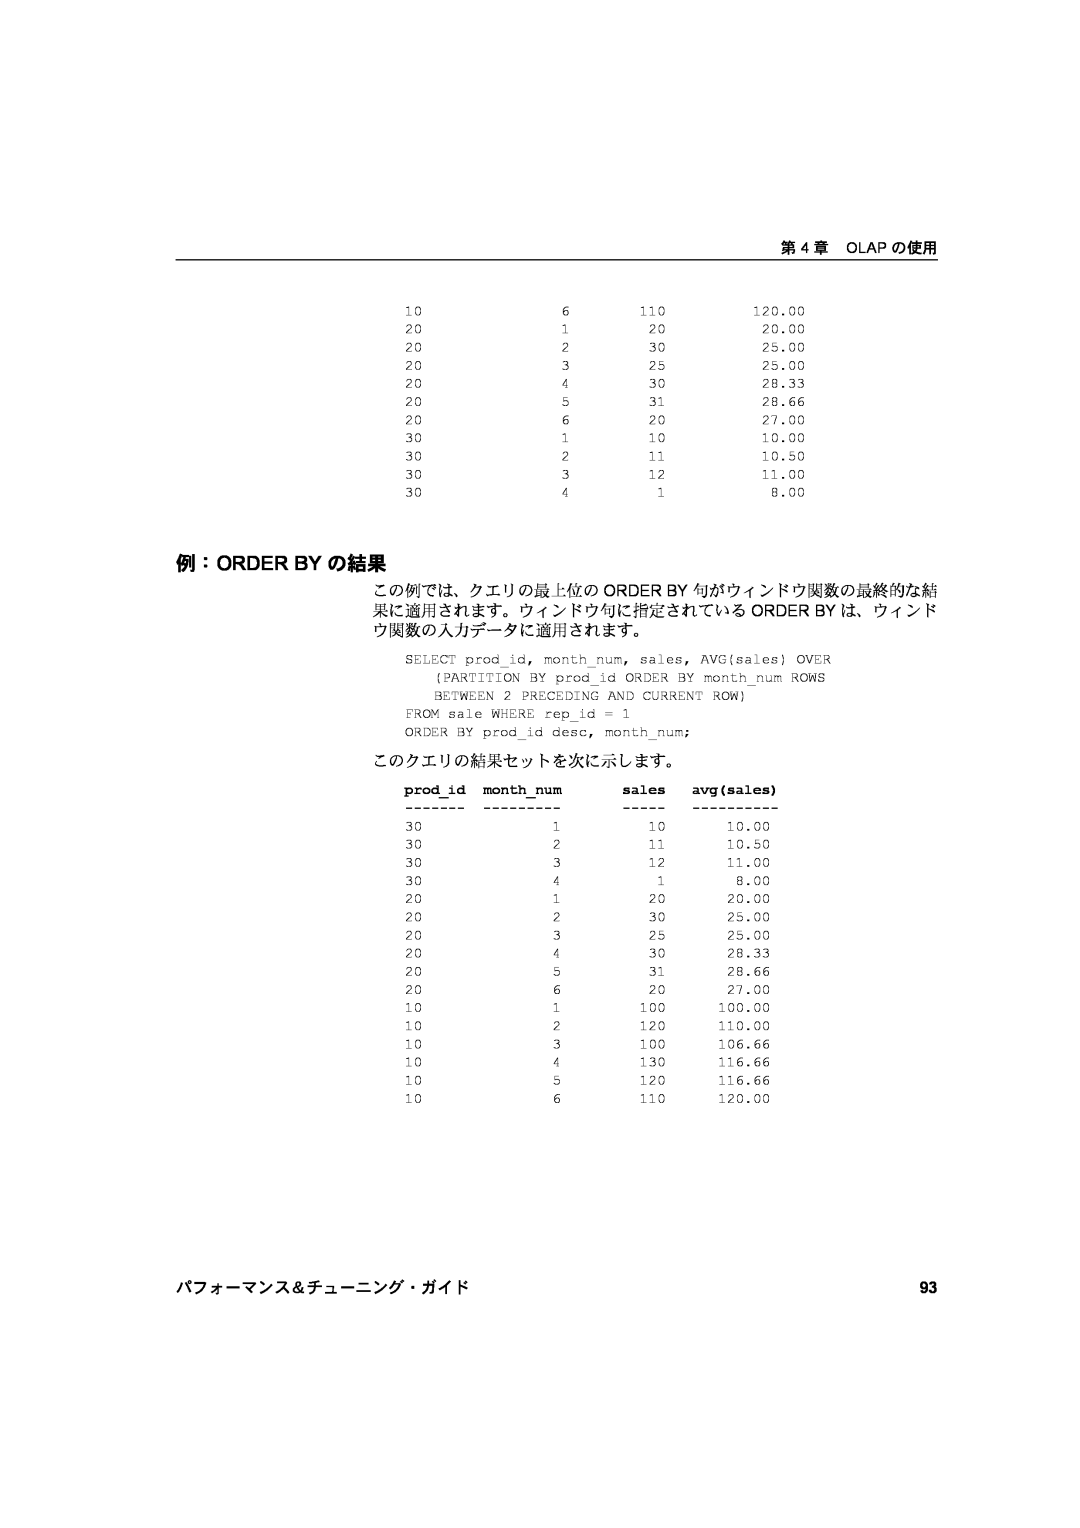 Sybase 12.7 manual 例：Order By の結果, パフォーマンス＆チューニング・ガイド, 第 4 章, prod_id, month_num, avgsales 